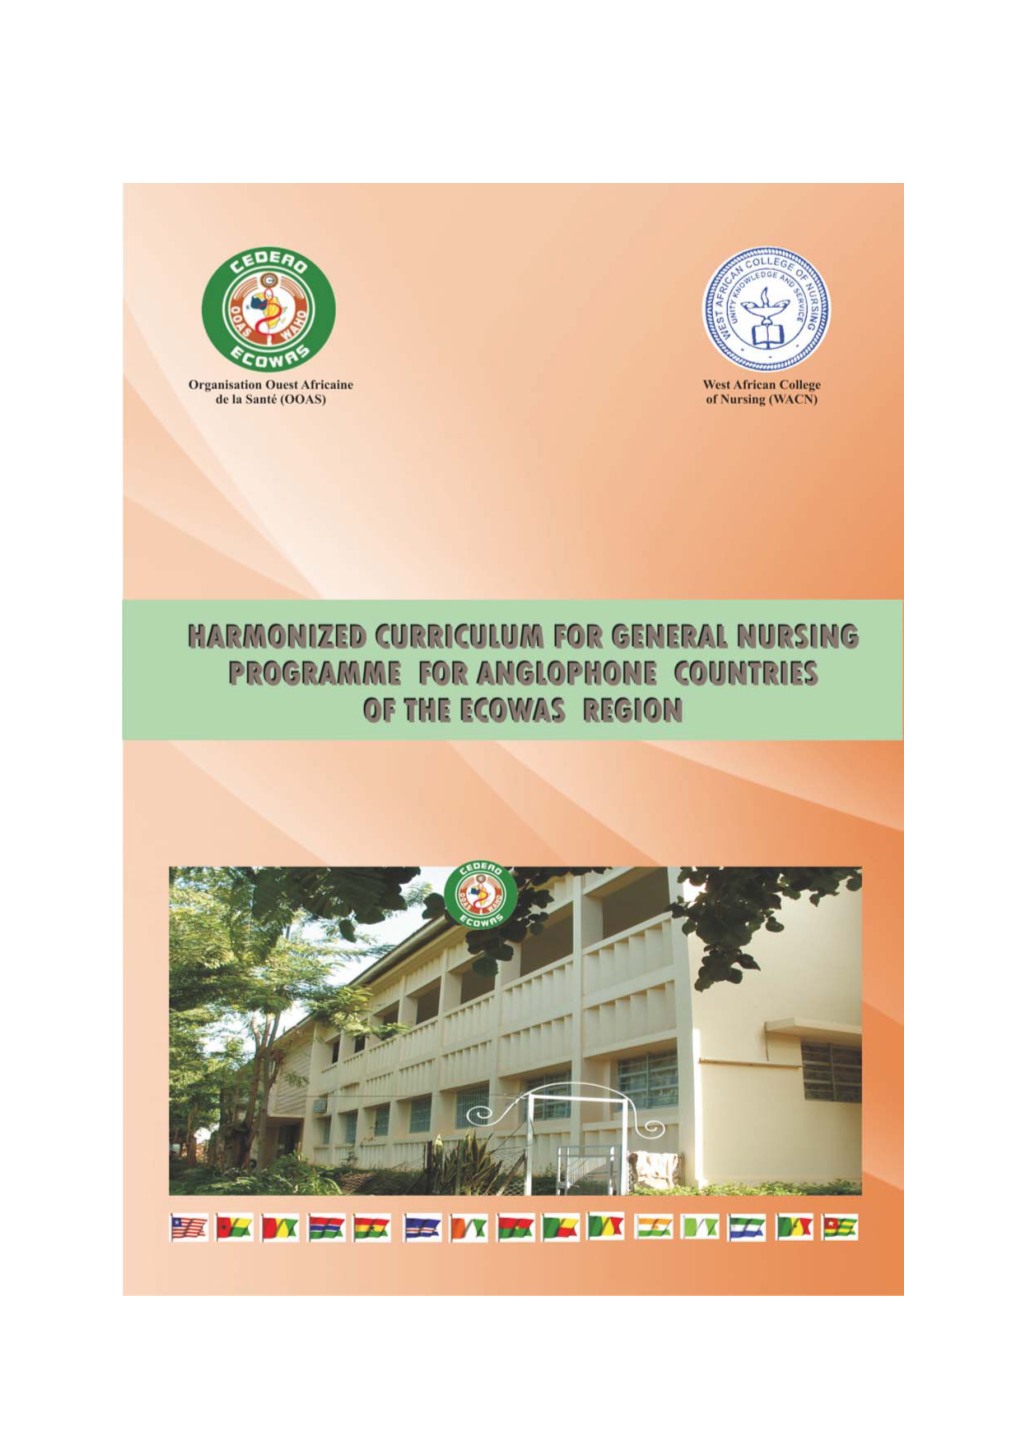 Harmonized Curriculum for General Nursing Programme for Anglophone Countries of the Ecowas Region